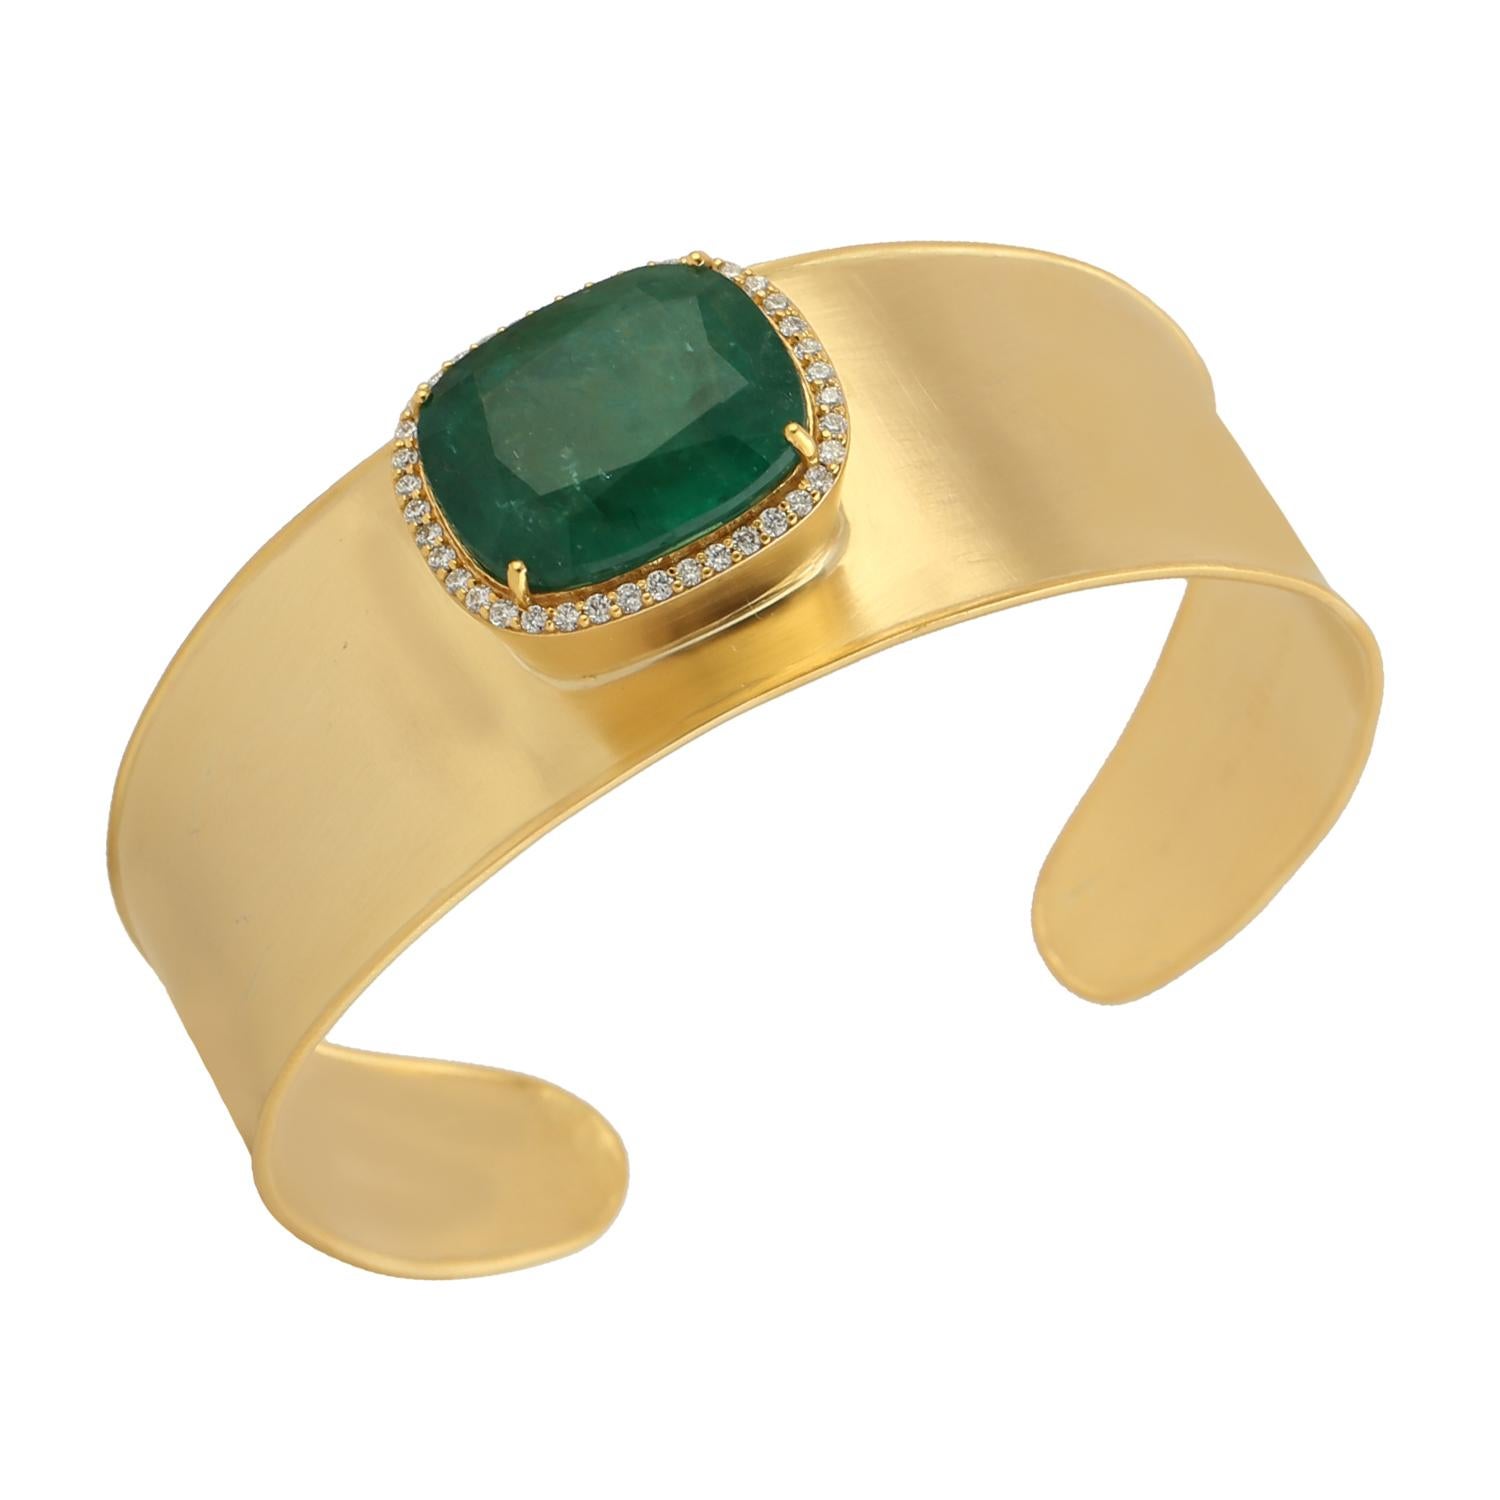 20ct Emerald Cushion Gold Cuff Made in 18k yellow gold In New Condition For Sale In New York, NY